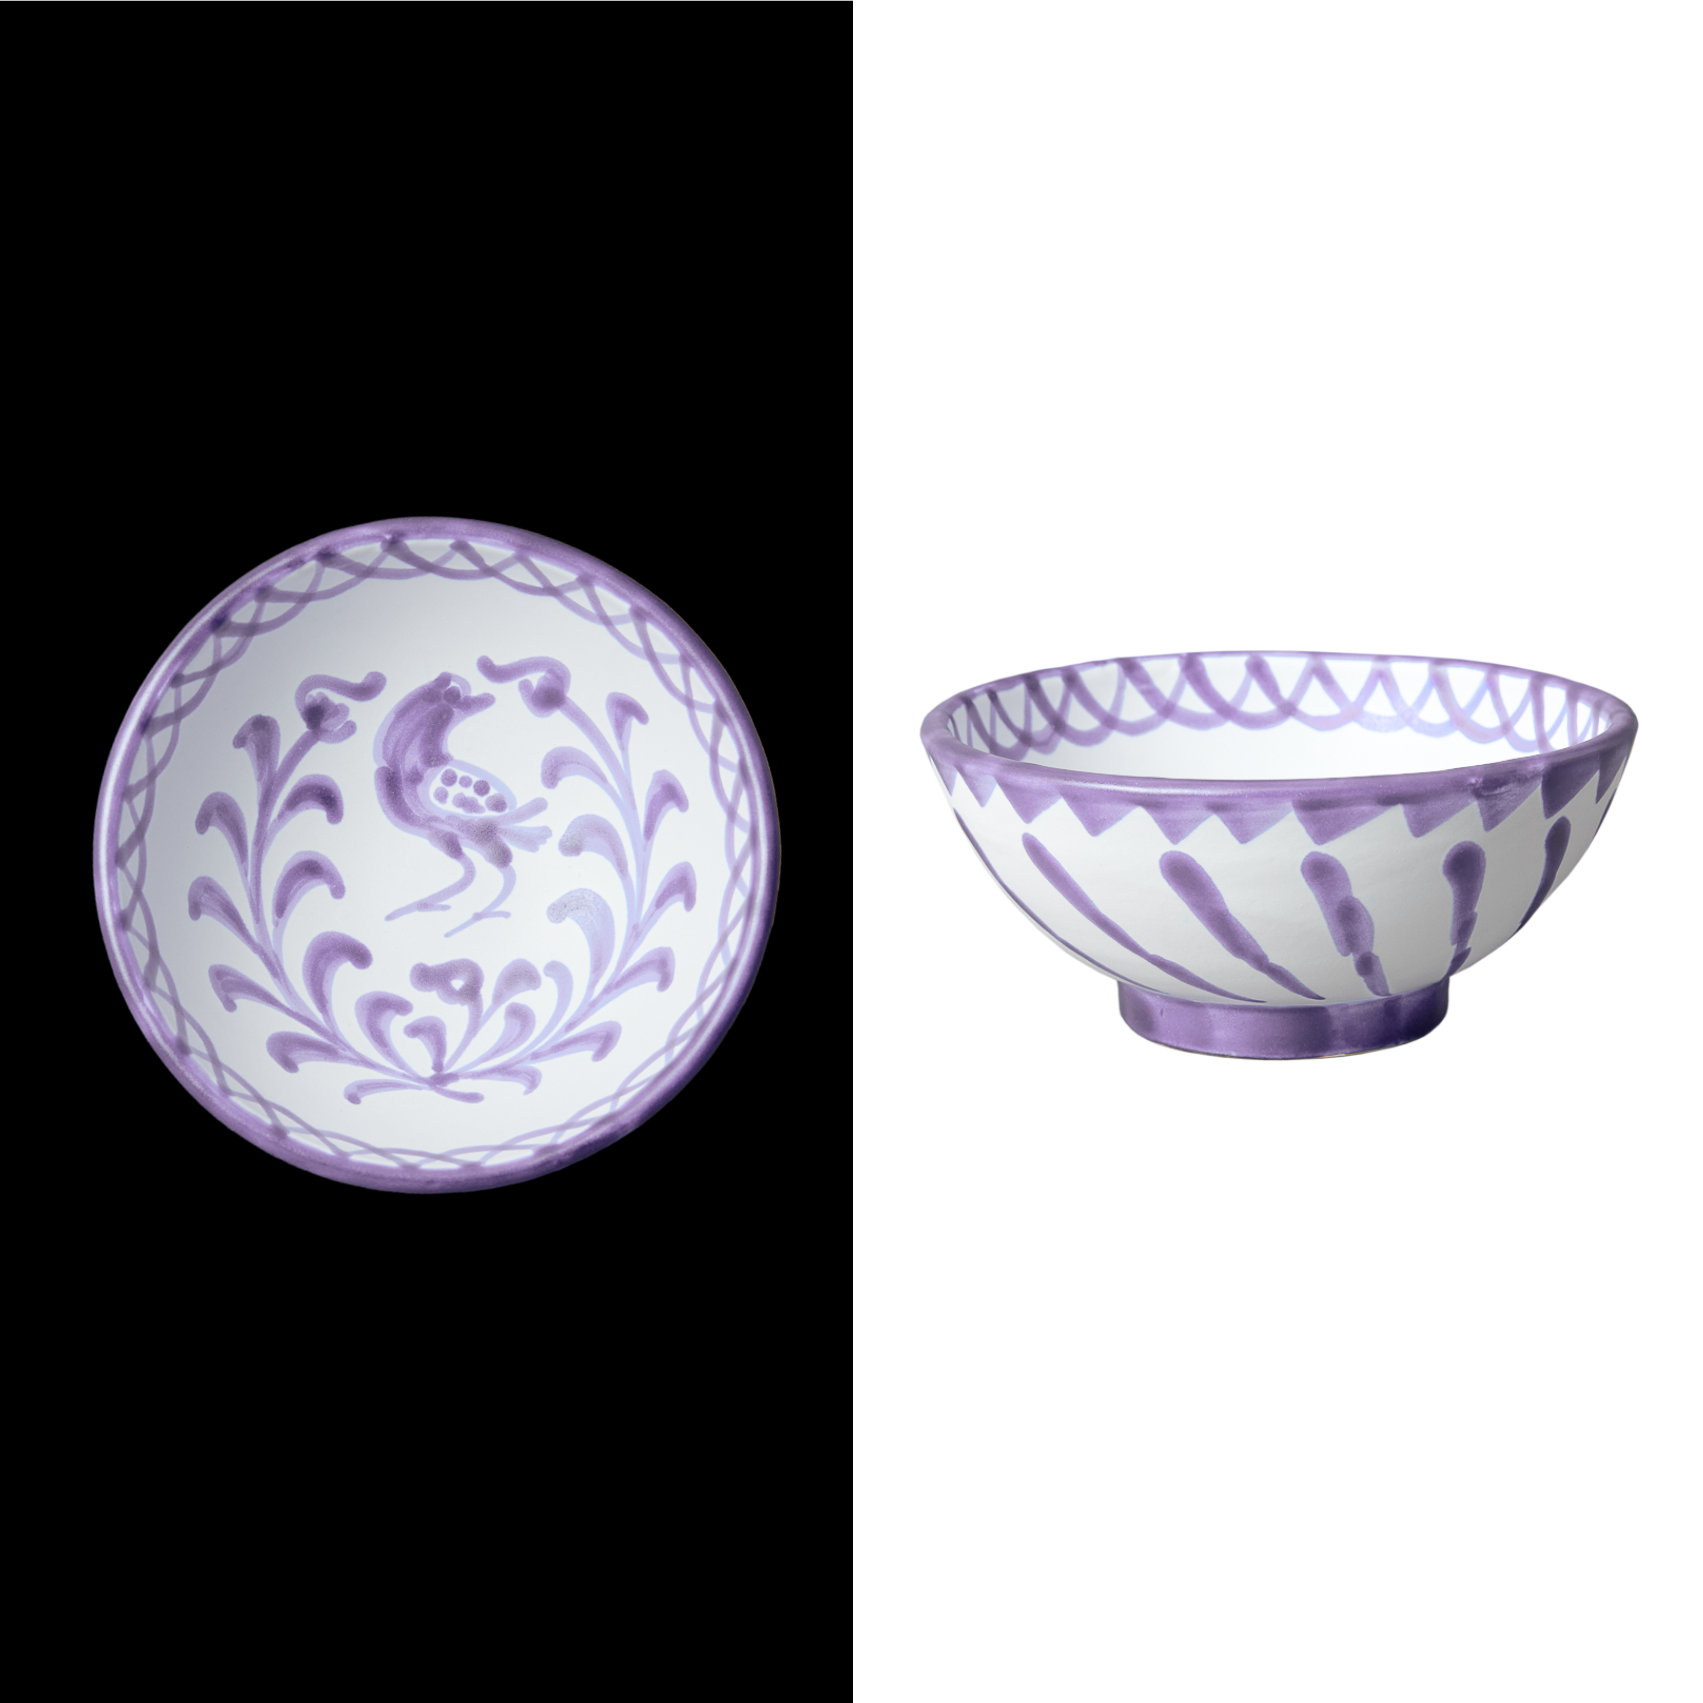 #002 THE TRADITIONAL SMALL BOWL